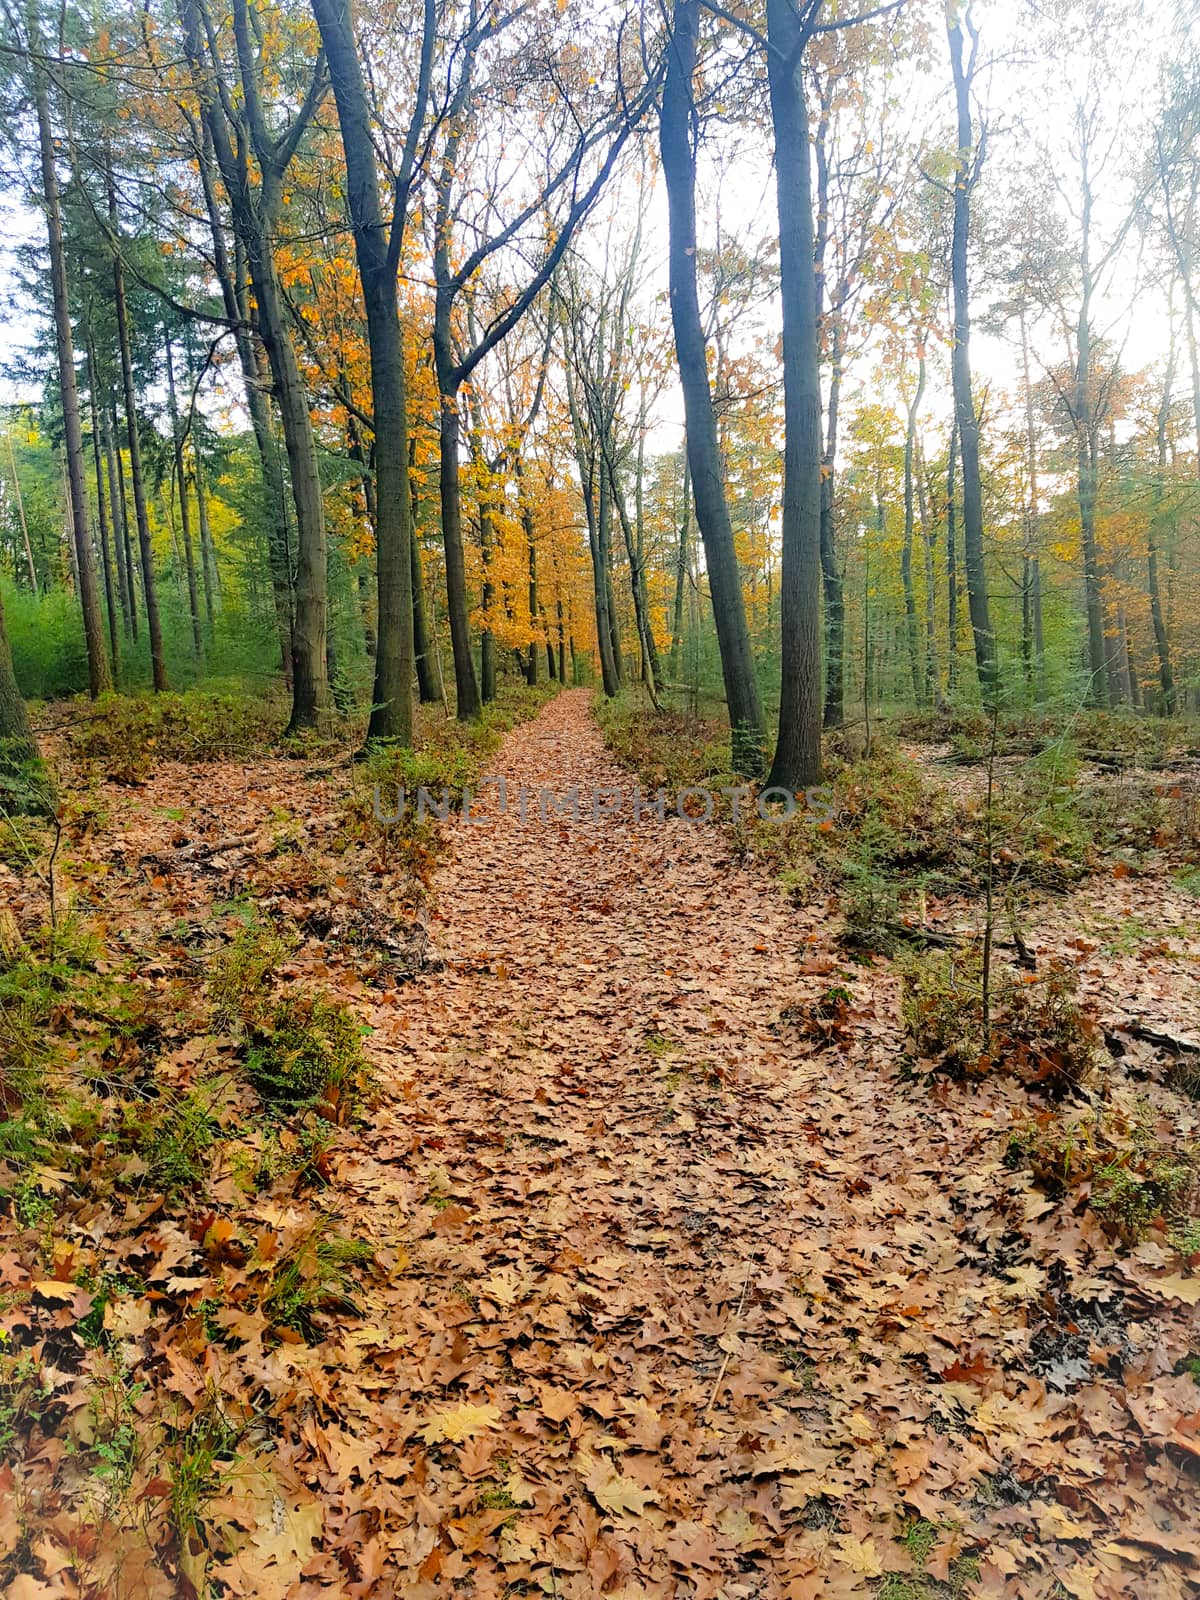 Forest With Fallen Leaves in the Autumn by TheDutchcowboy